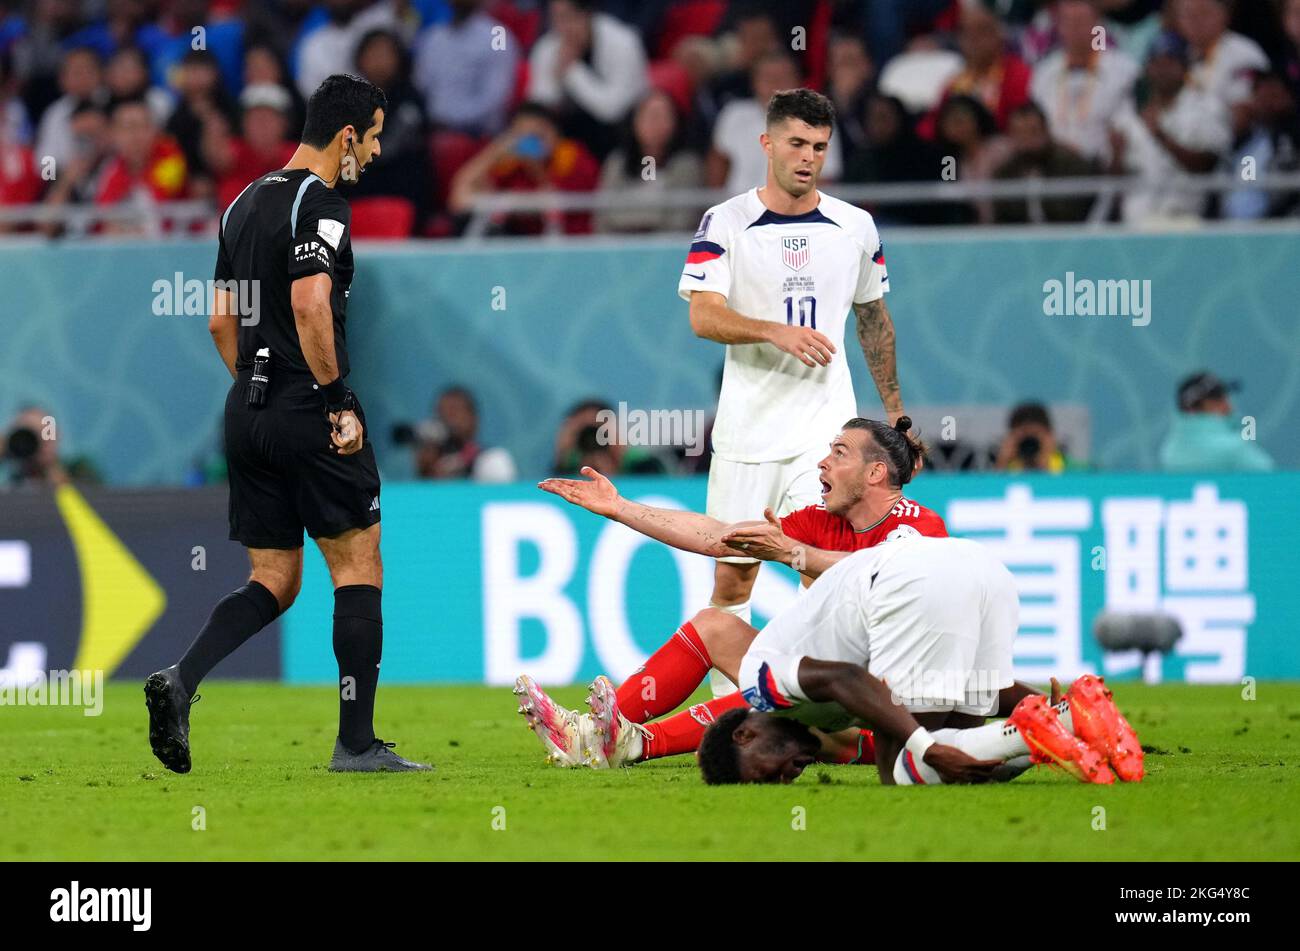 Referee Abdulrahman Al-Jassim speaks to Wales' Gareth Bale after a foul on USA's Yunus Musah during the FIFA World Cup Group B match at the Ahmad Bin Ali Stadium, Al-Rayyan. Picture date: Monday November 21, 2022. Stock Photo